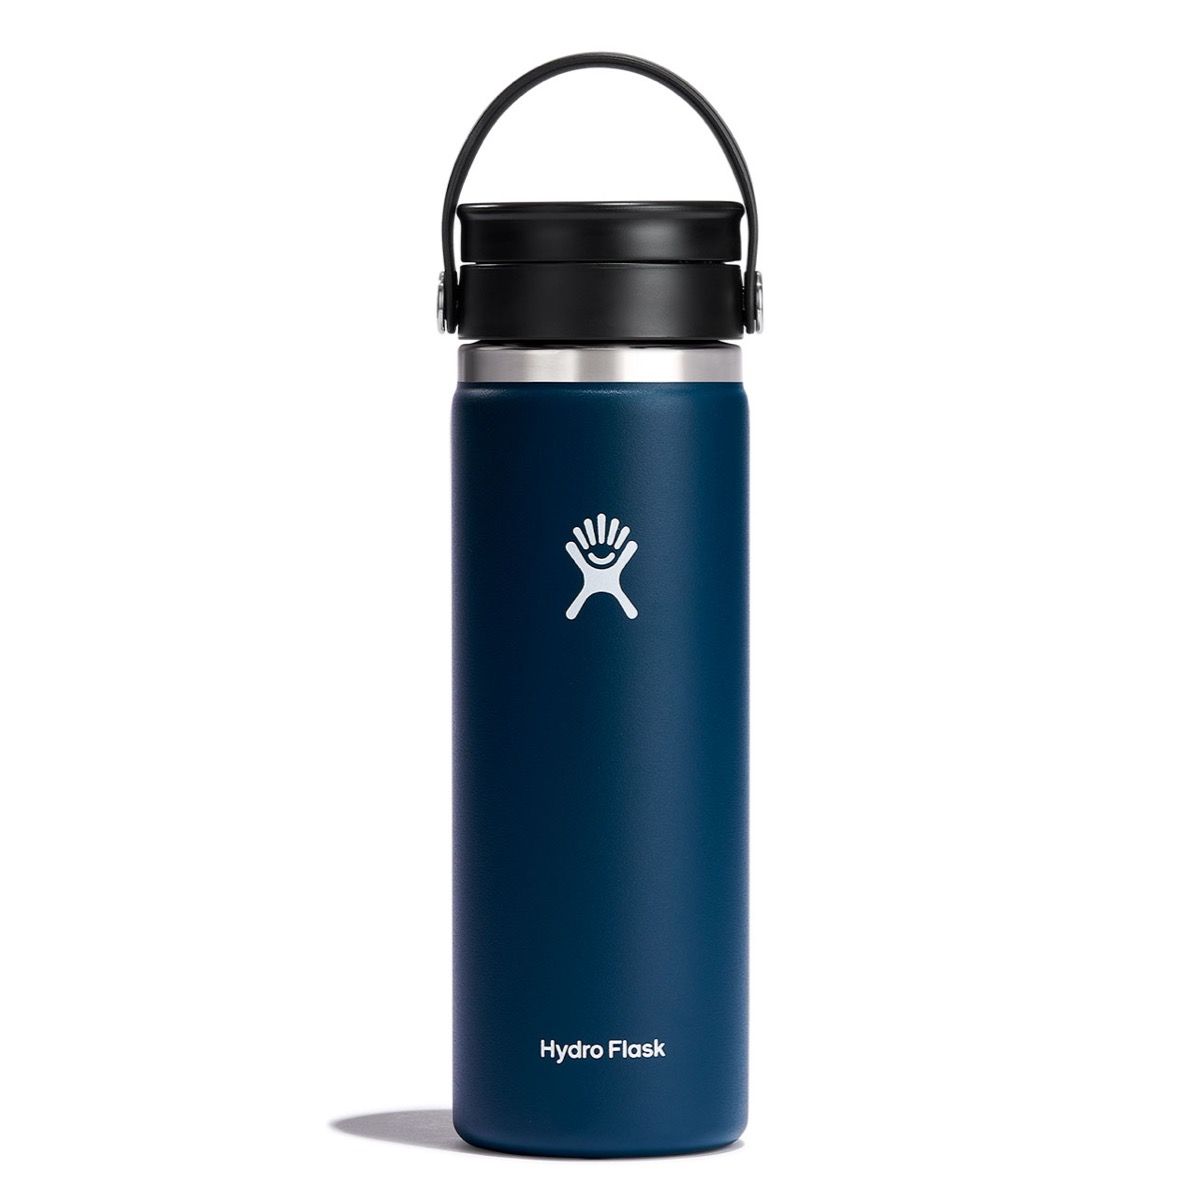 Hydro Flask 20oz Wide Mouth with Flex Sip Lid Accessories Hydro Flask Indigo-464  